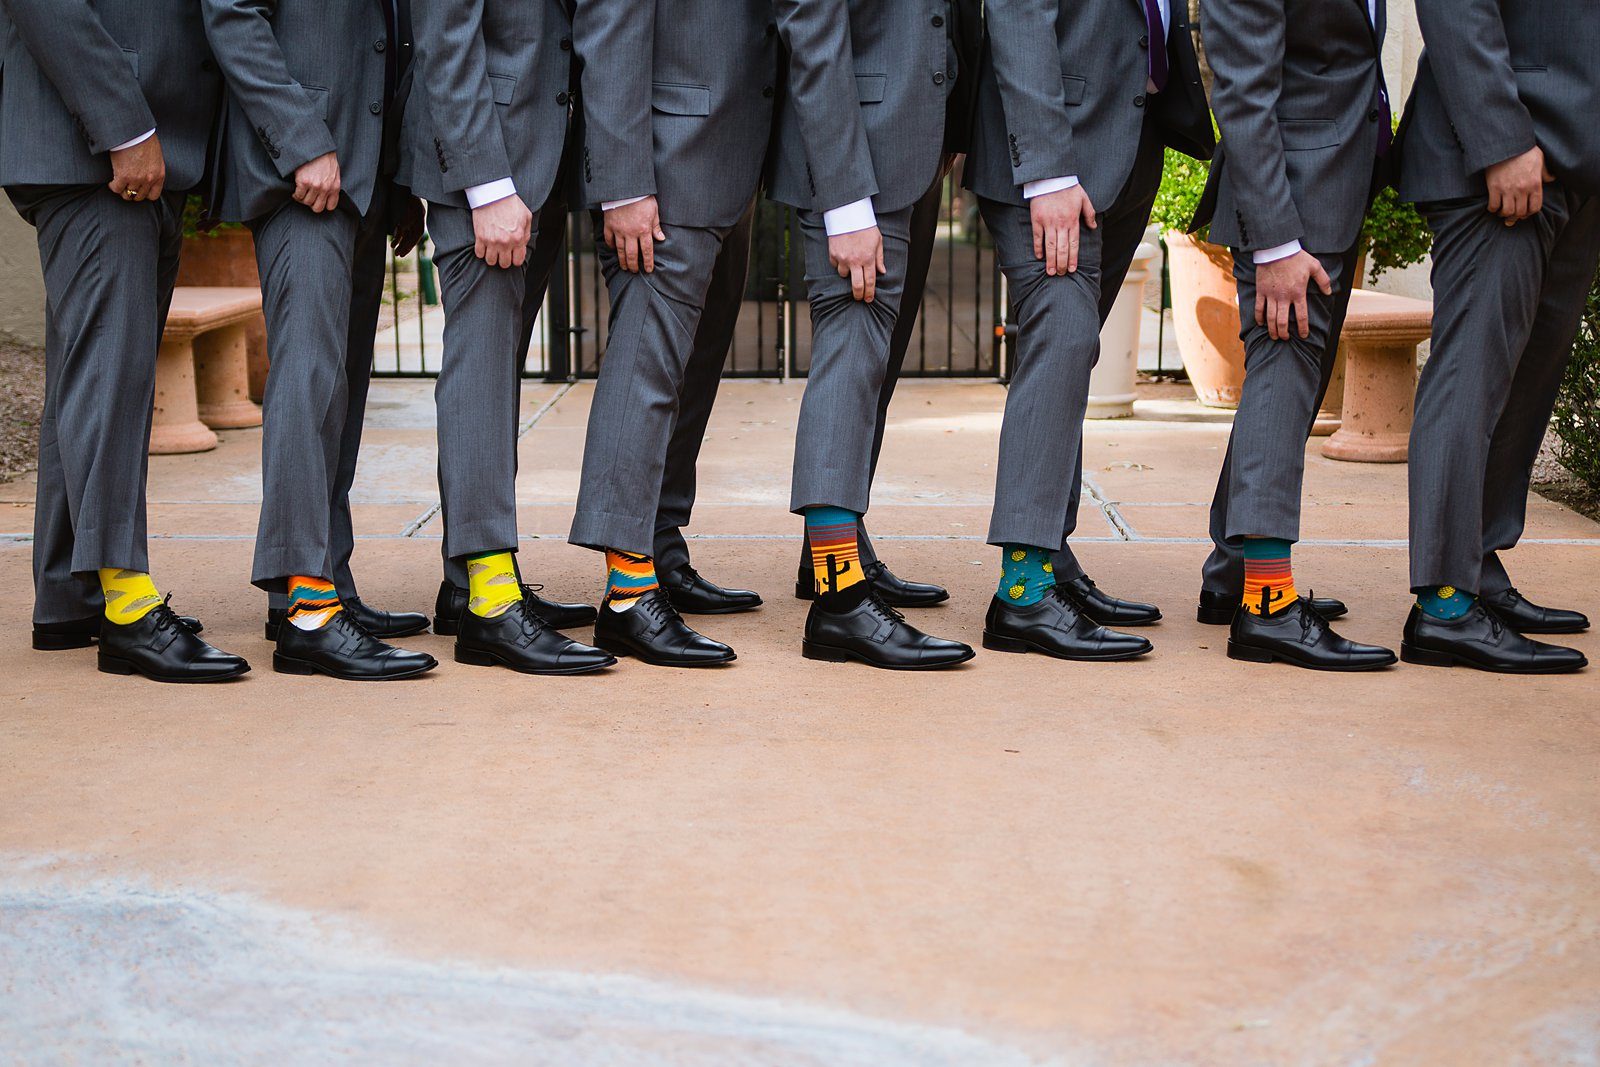 Groomsmen showing off their fun wedding socks under their suits by PMA Photography.